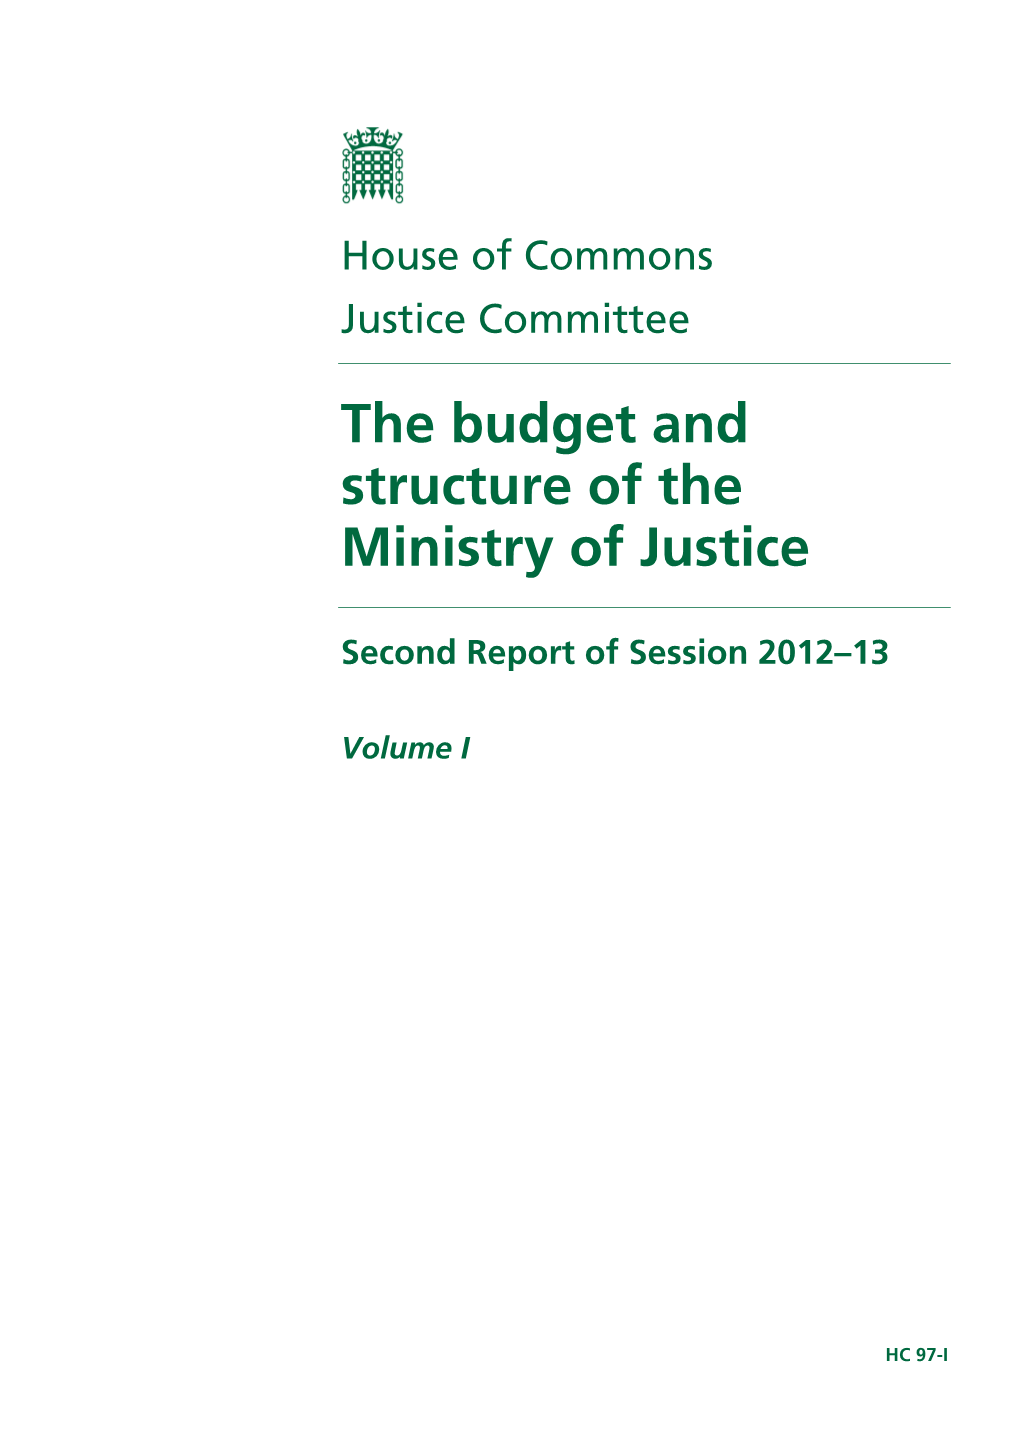 The Budget and Structure of the Ministry of Justice